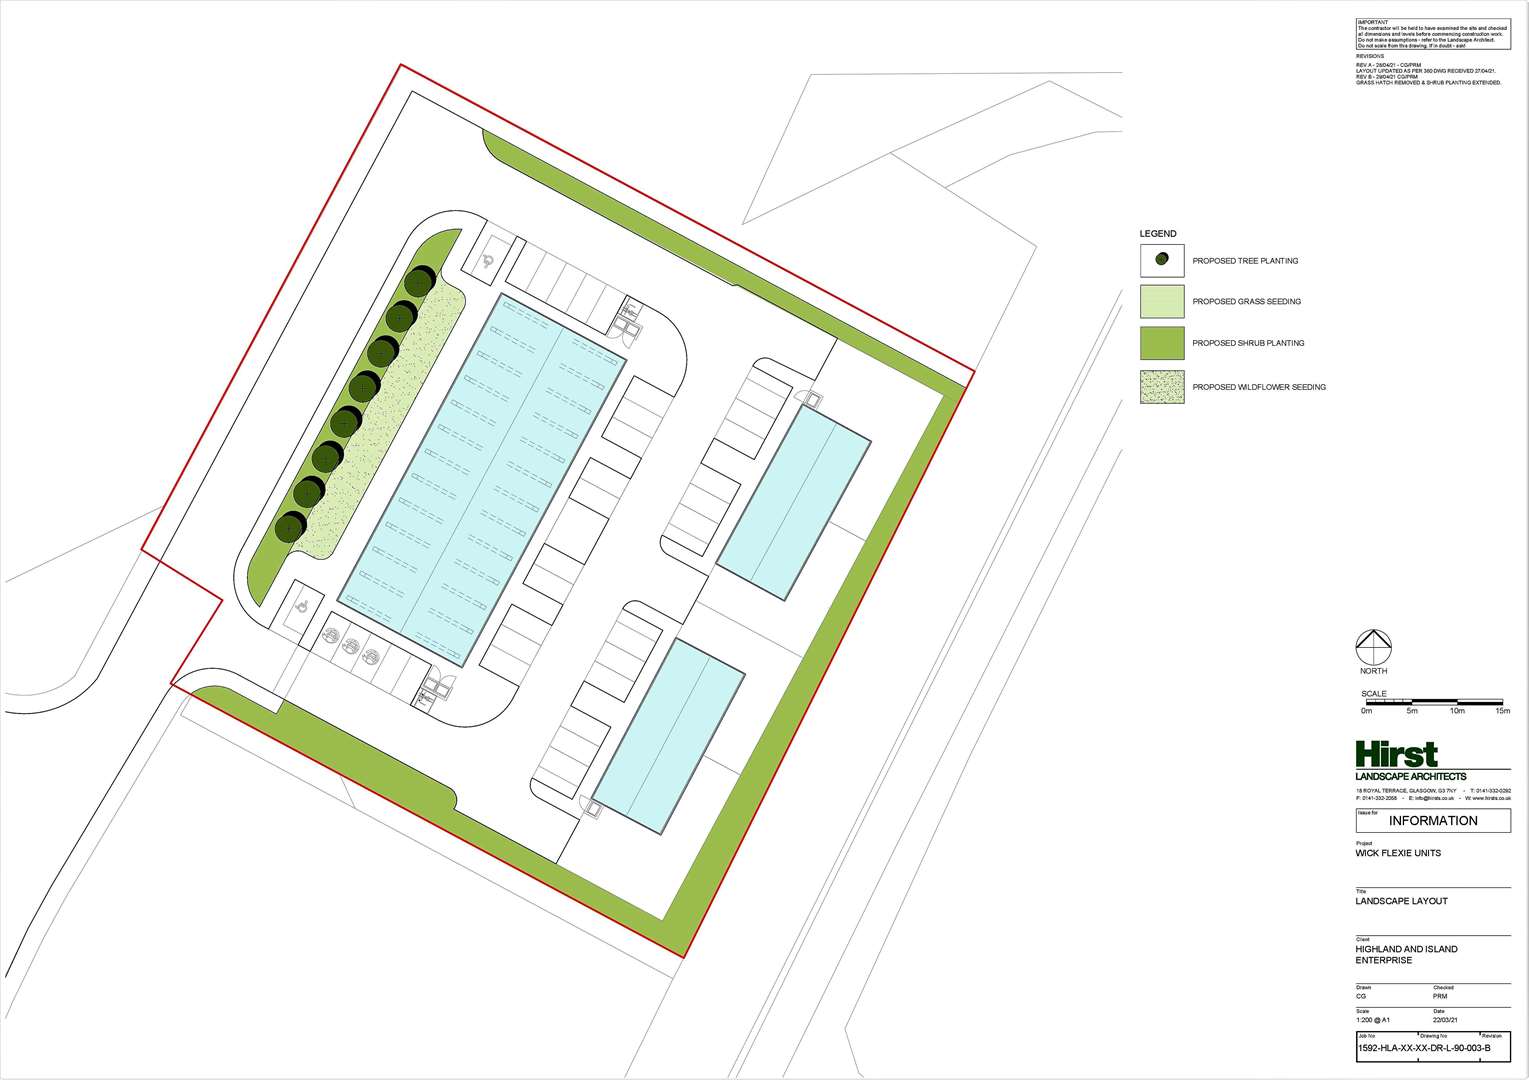 Landscaping plan for the flex units at Wick Business park.